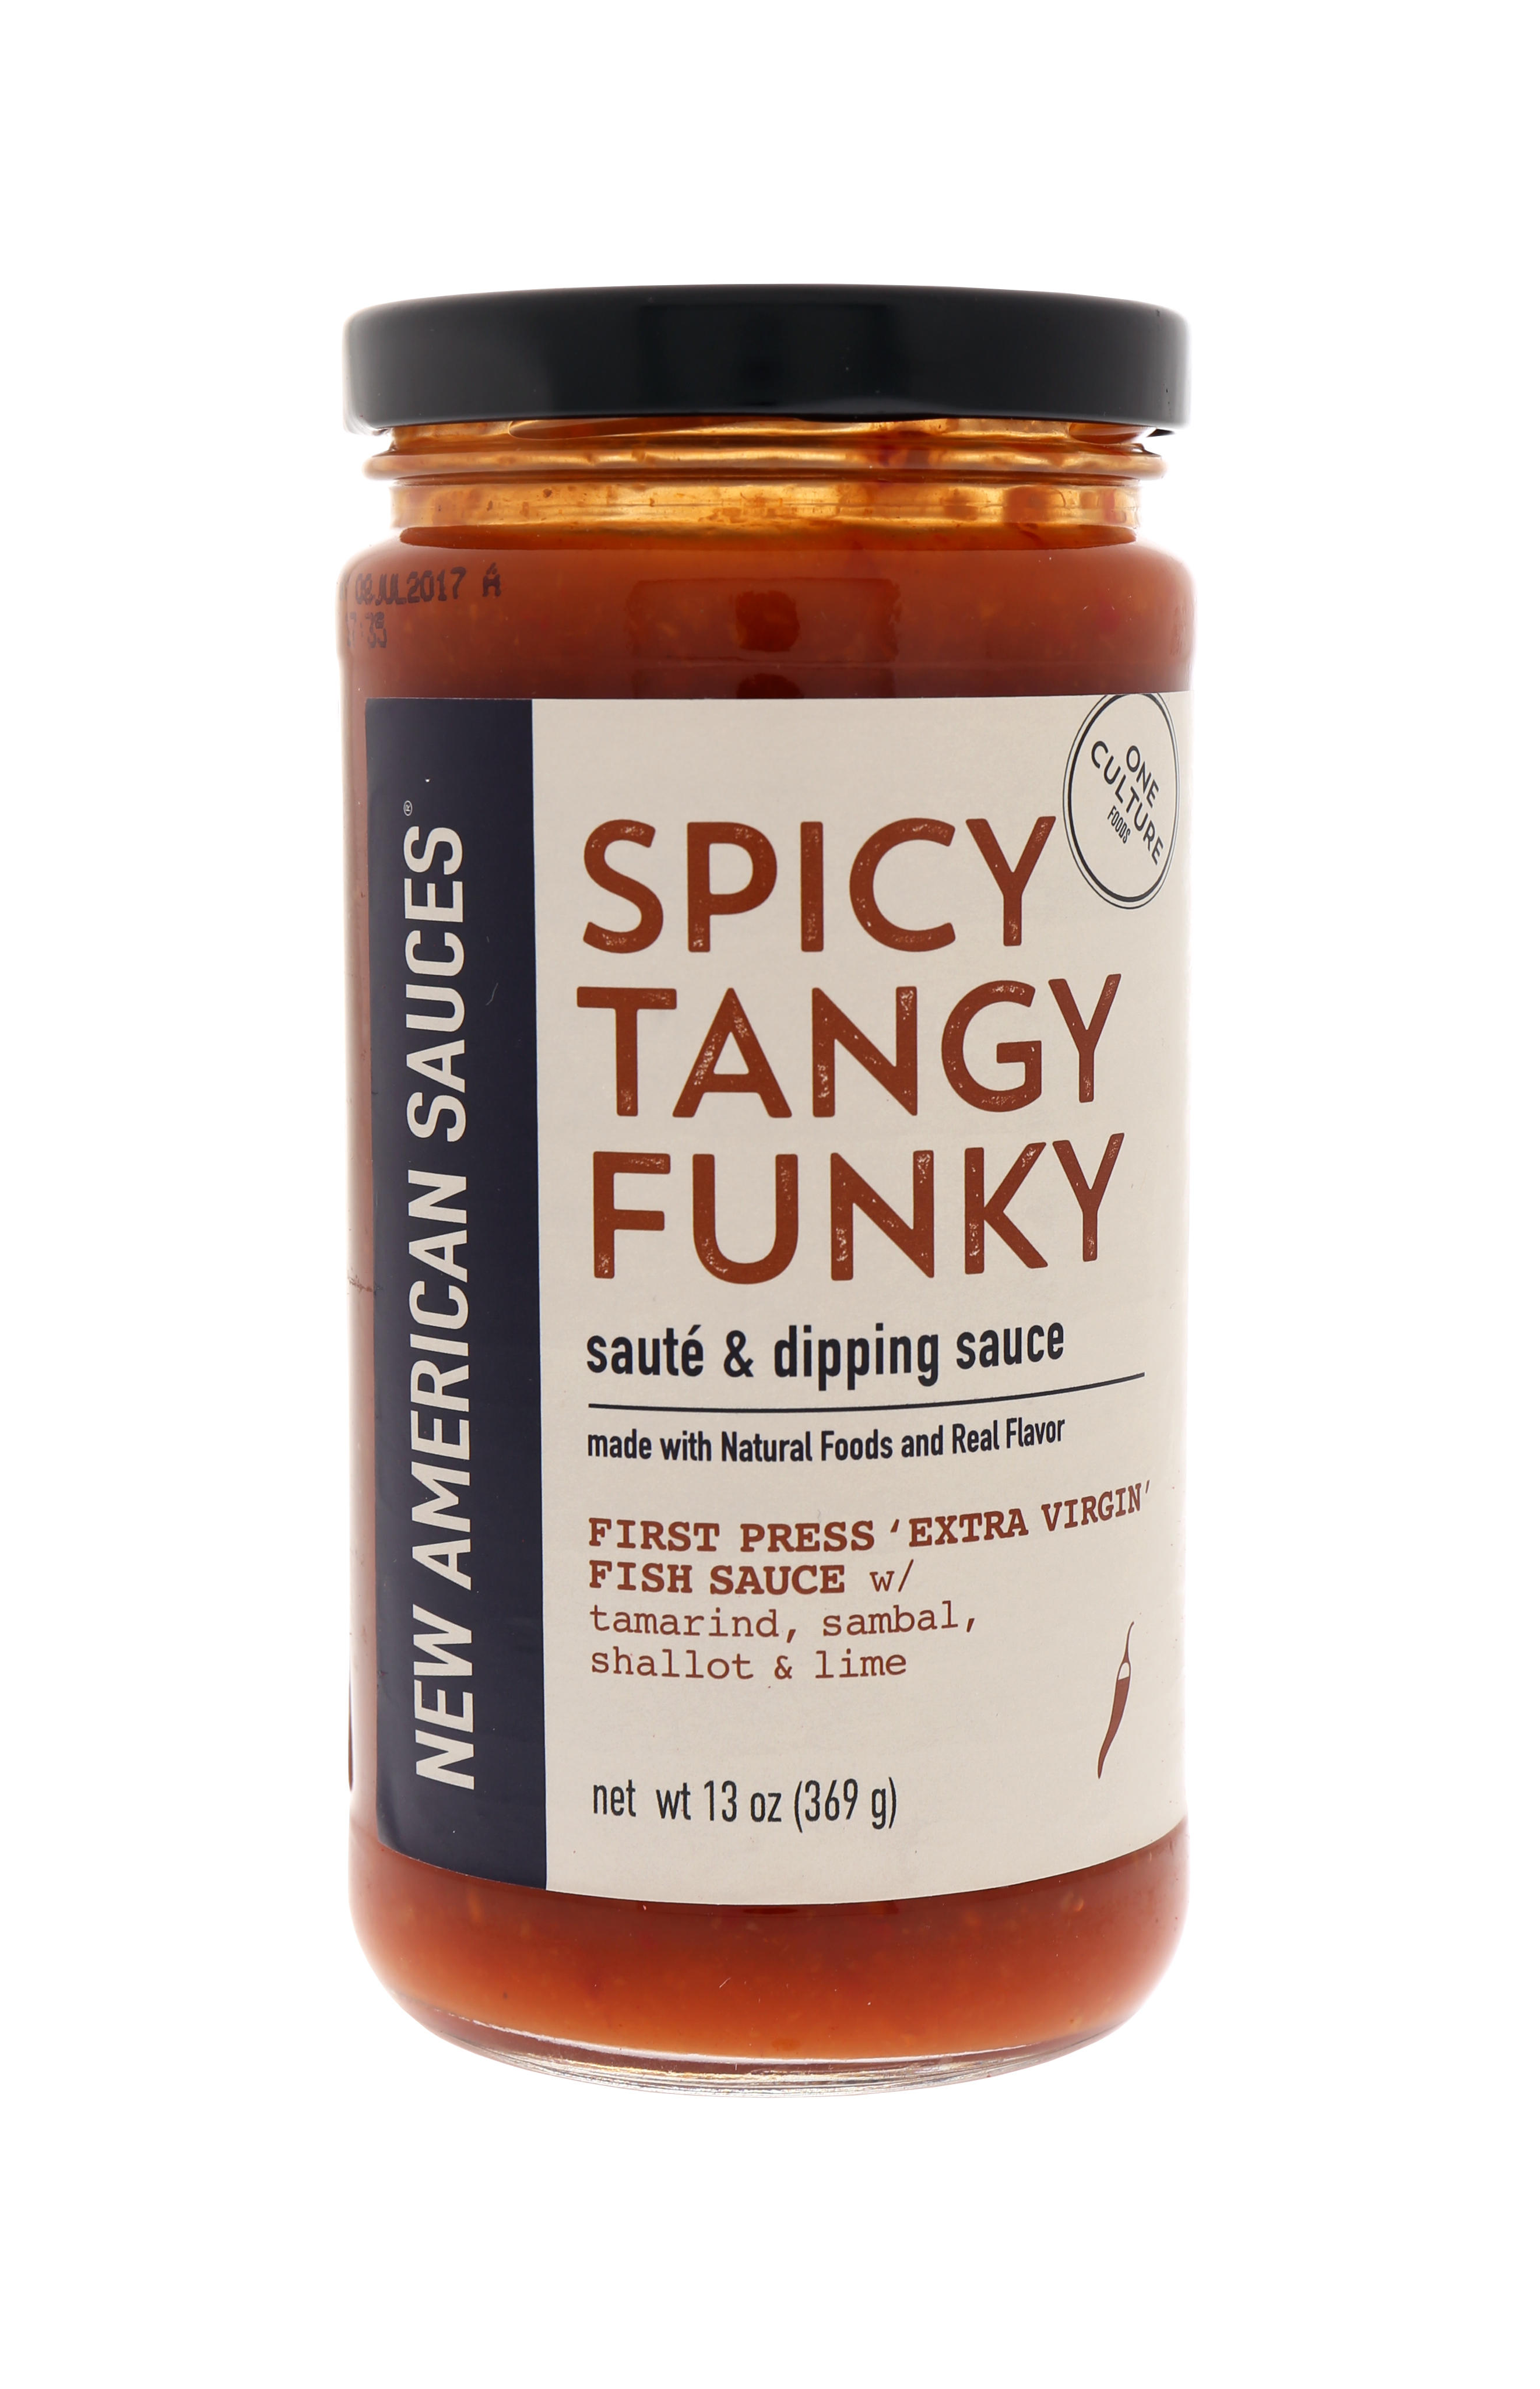 Spicy Tangy Funky